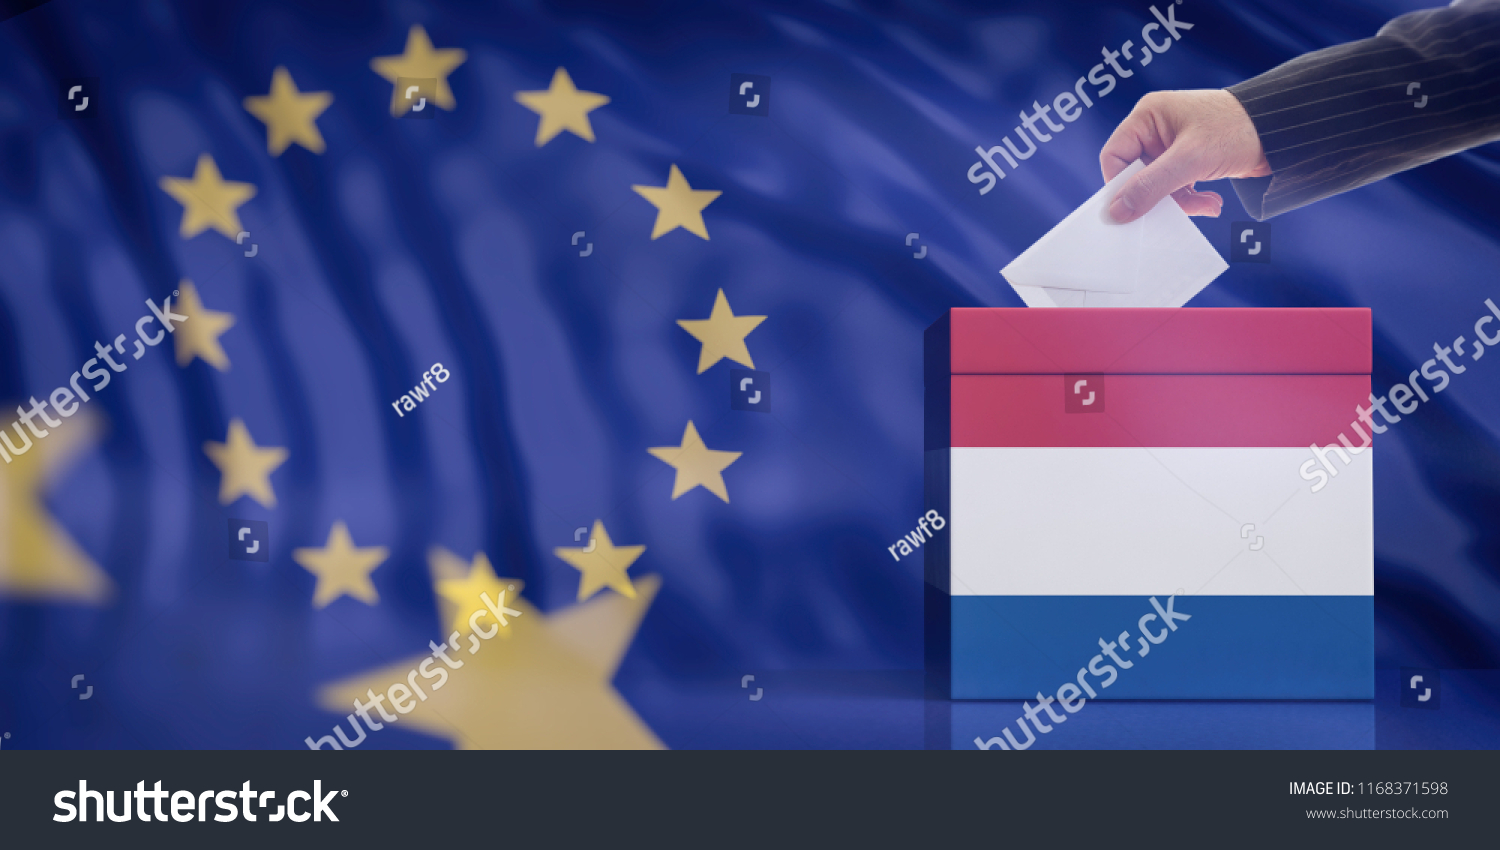 Elections in Netherlands for EU parliament. Hand inserting an envelope in a Dutch flag ballot box on European Union flag background. 3d illustration #1168371598